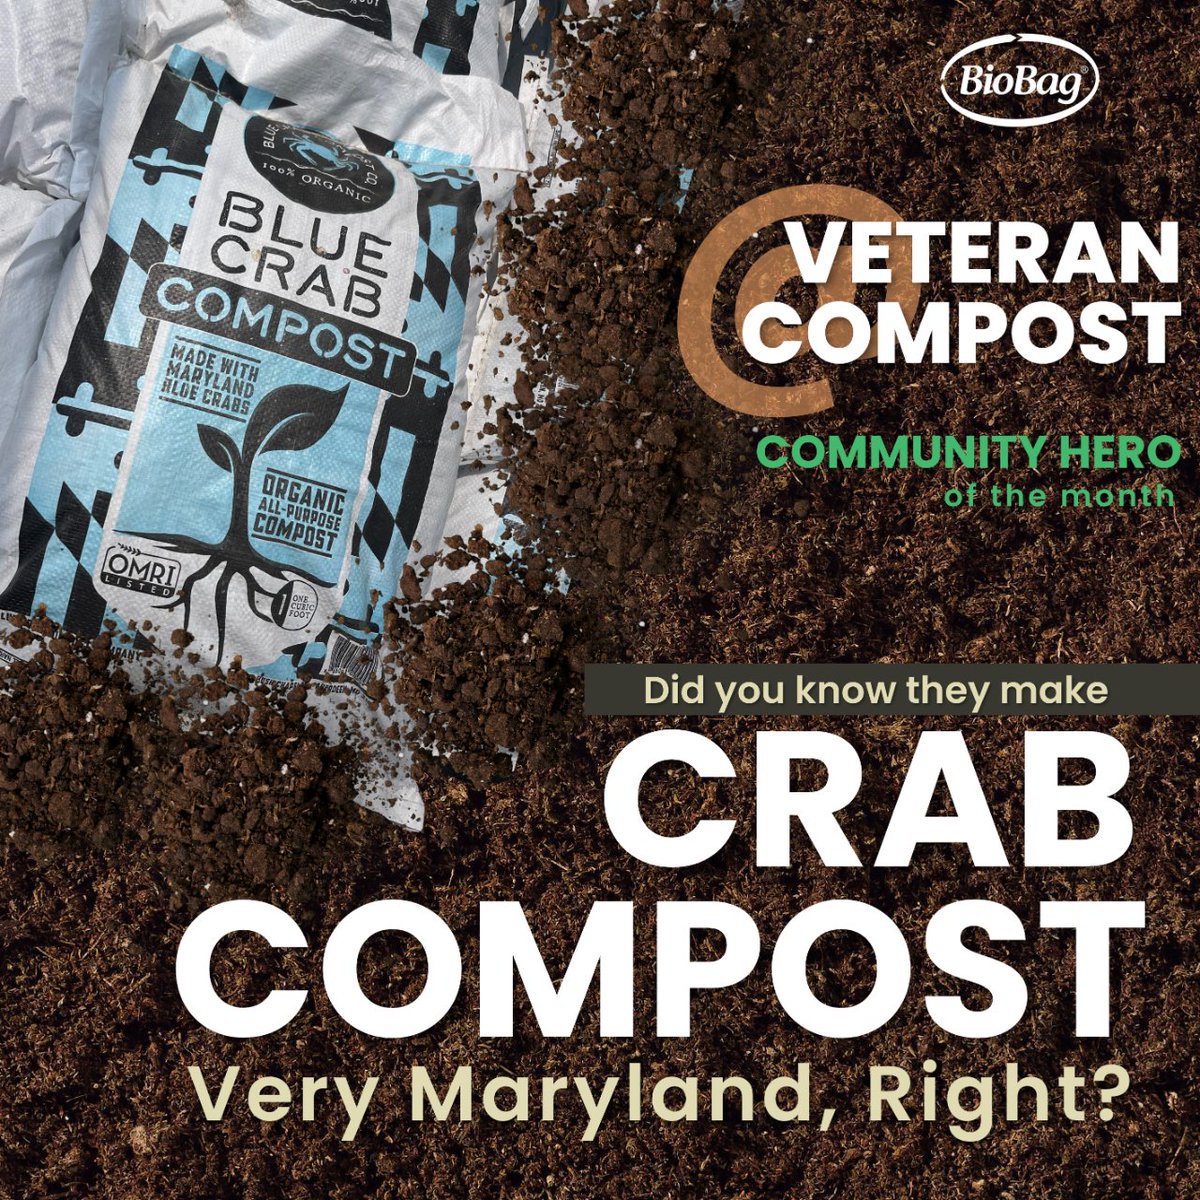 Back to our Community Hero of the Month! Did you know Veteran Compost is as 'Maryland as You Can Get' with their organic crab compost? How cool! #greencommunities #sustainability #composting